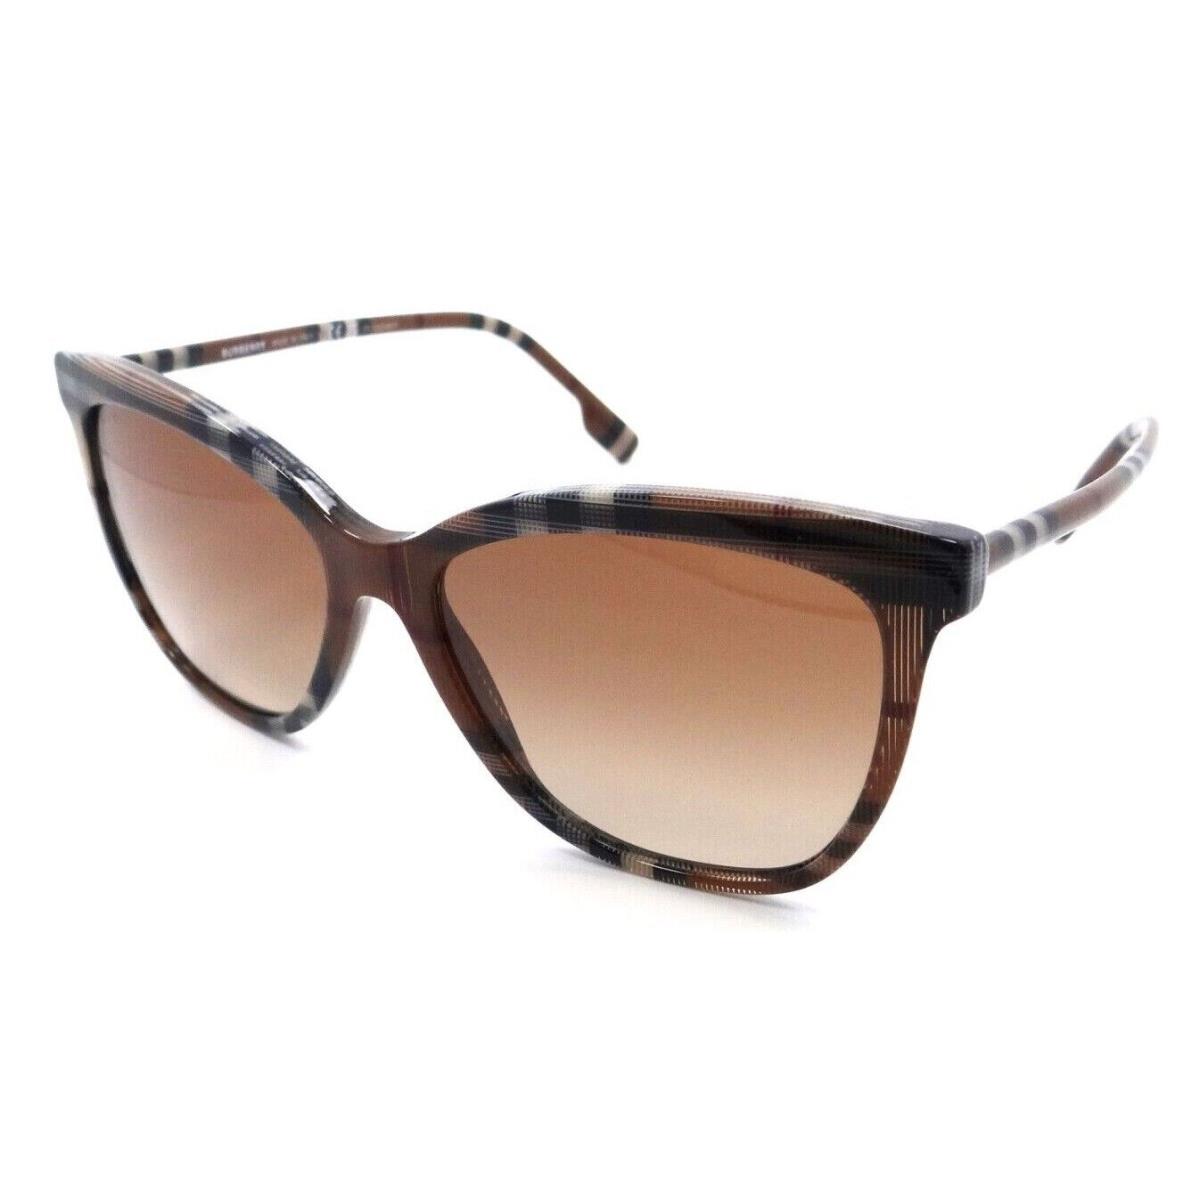 Burberry Sunglasses BE 4308 4005/13 56-16-140 Clare Check Brown / Brown Gradient - Multicolor Frame